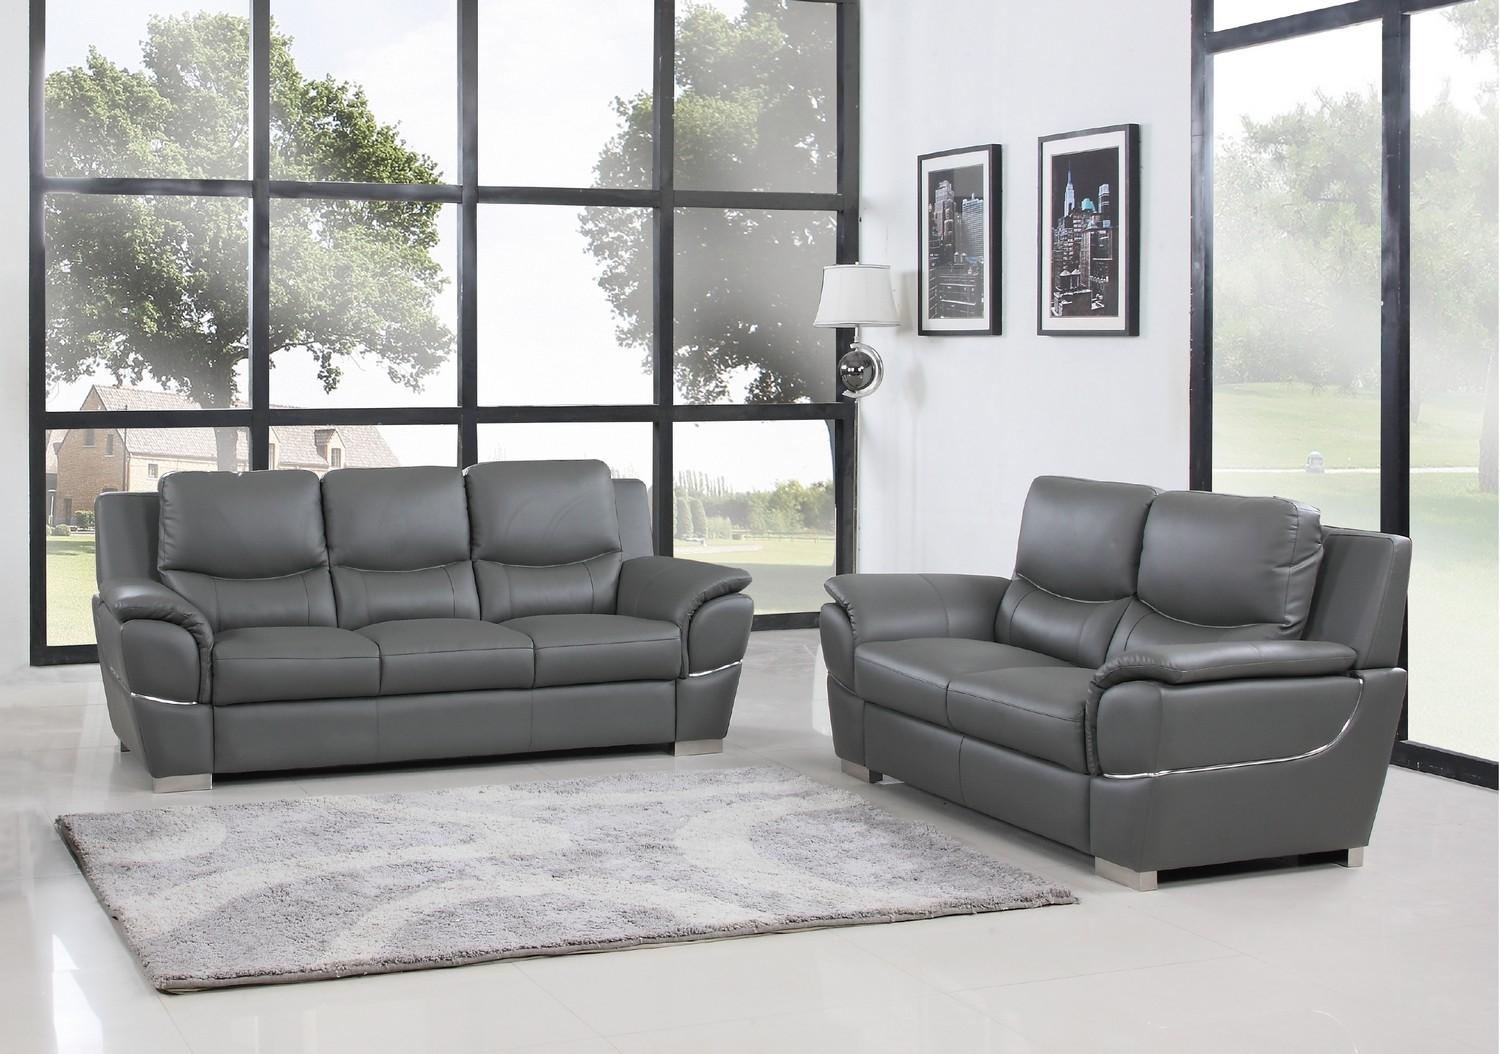 Contemporary Sofa and Loveseat Set 4572 4572-GRAY-2PC in Gray Leather gel match